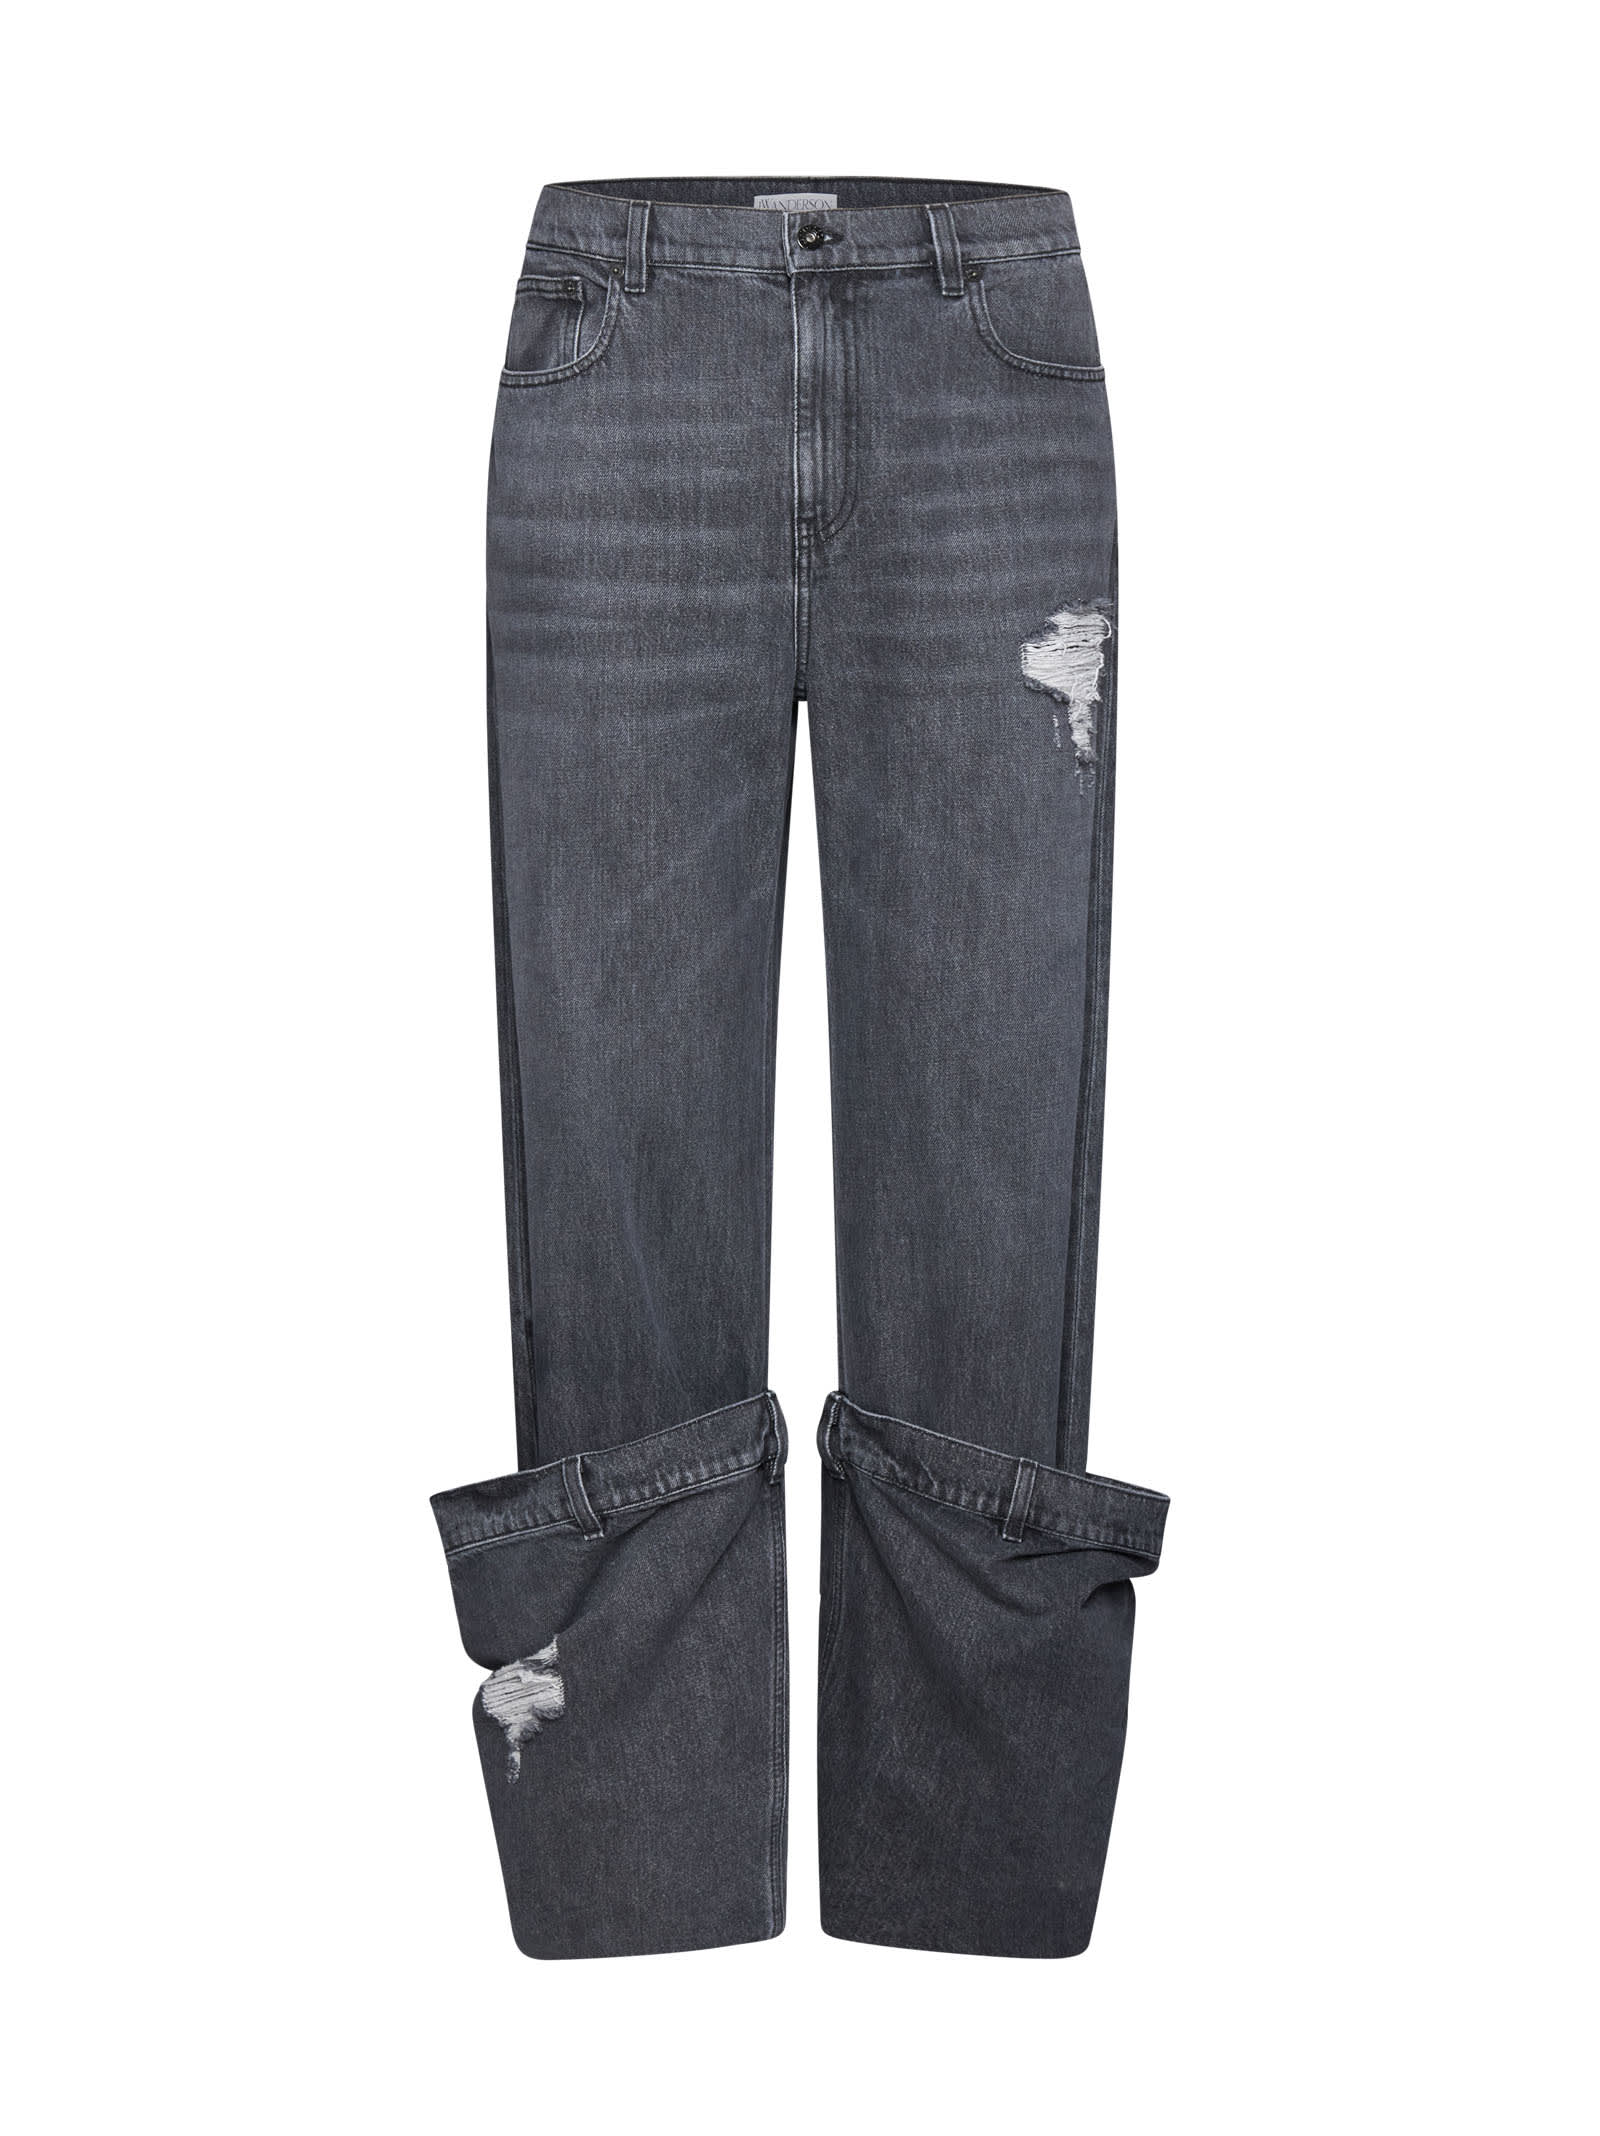 JW ANDERSON JEANS